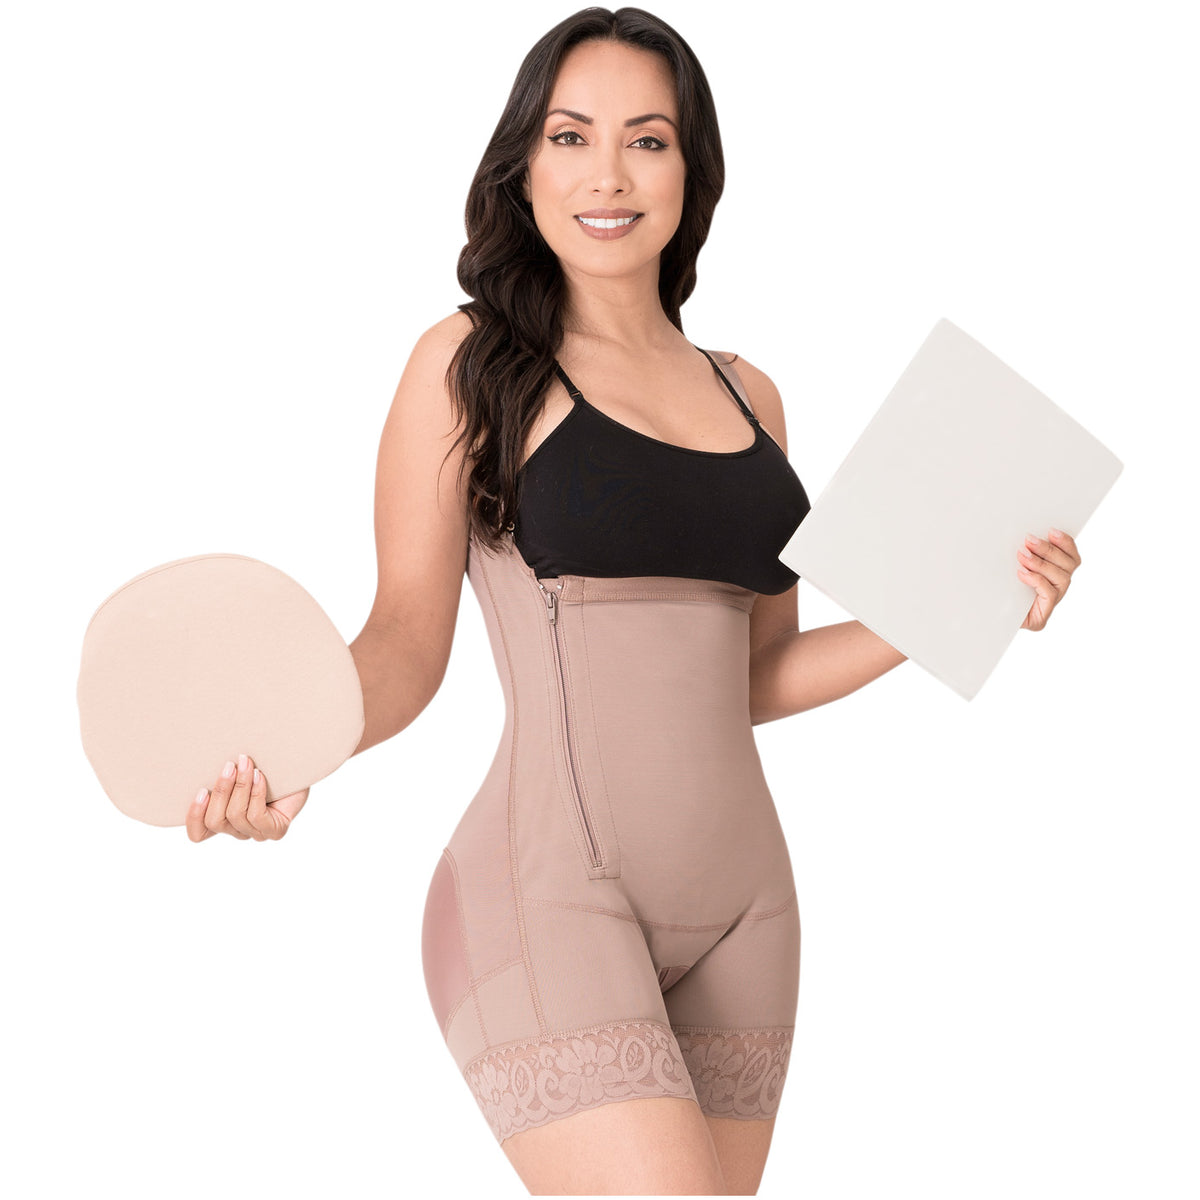  Snatched Body - Women's Stage 1 Faja Colombianas with Bra  Shapewear BBL Post Surgery Compression Garment - Best for Liposuction, Tummy  Tuck, Reductoras Moldeadoras & Butt Lifting - XS, Black 